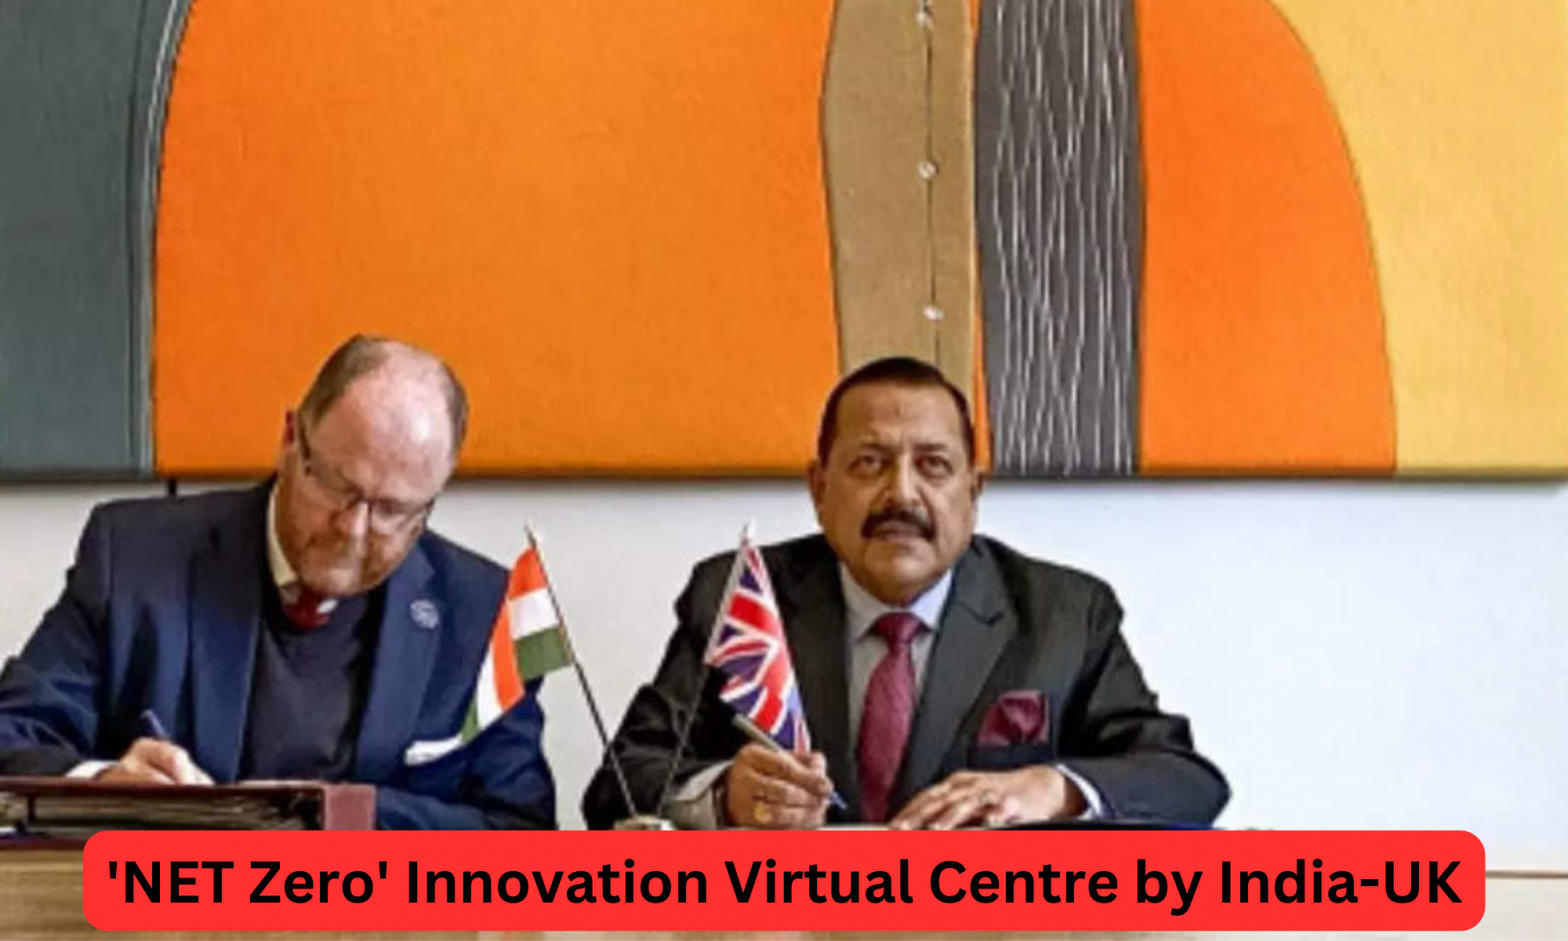 'NET Zero' Innovation Virtual Centre to be jointly created by India-UK